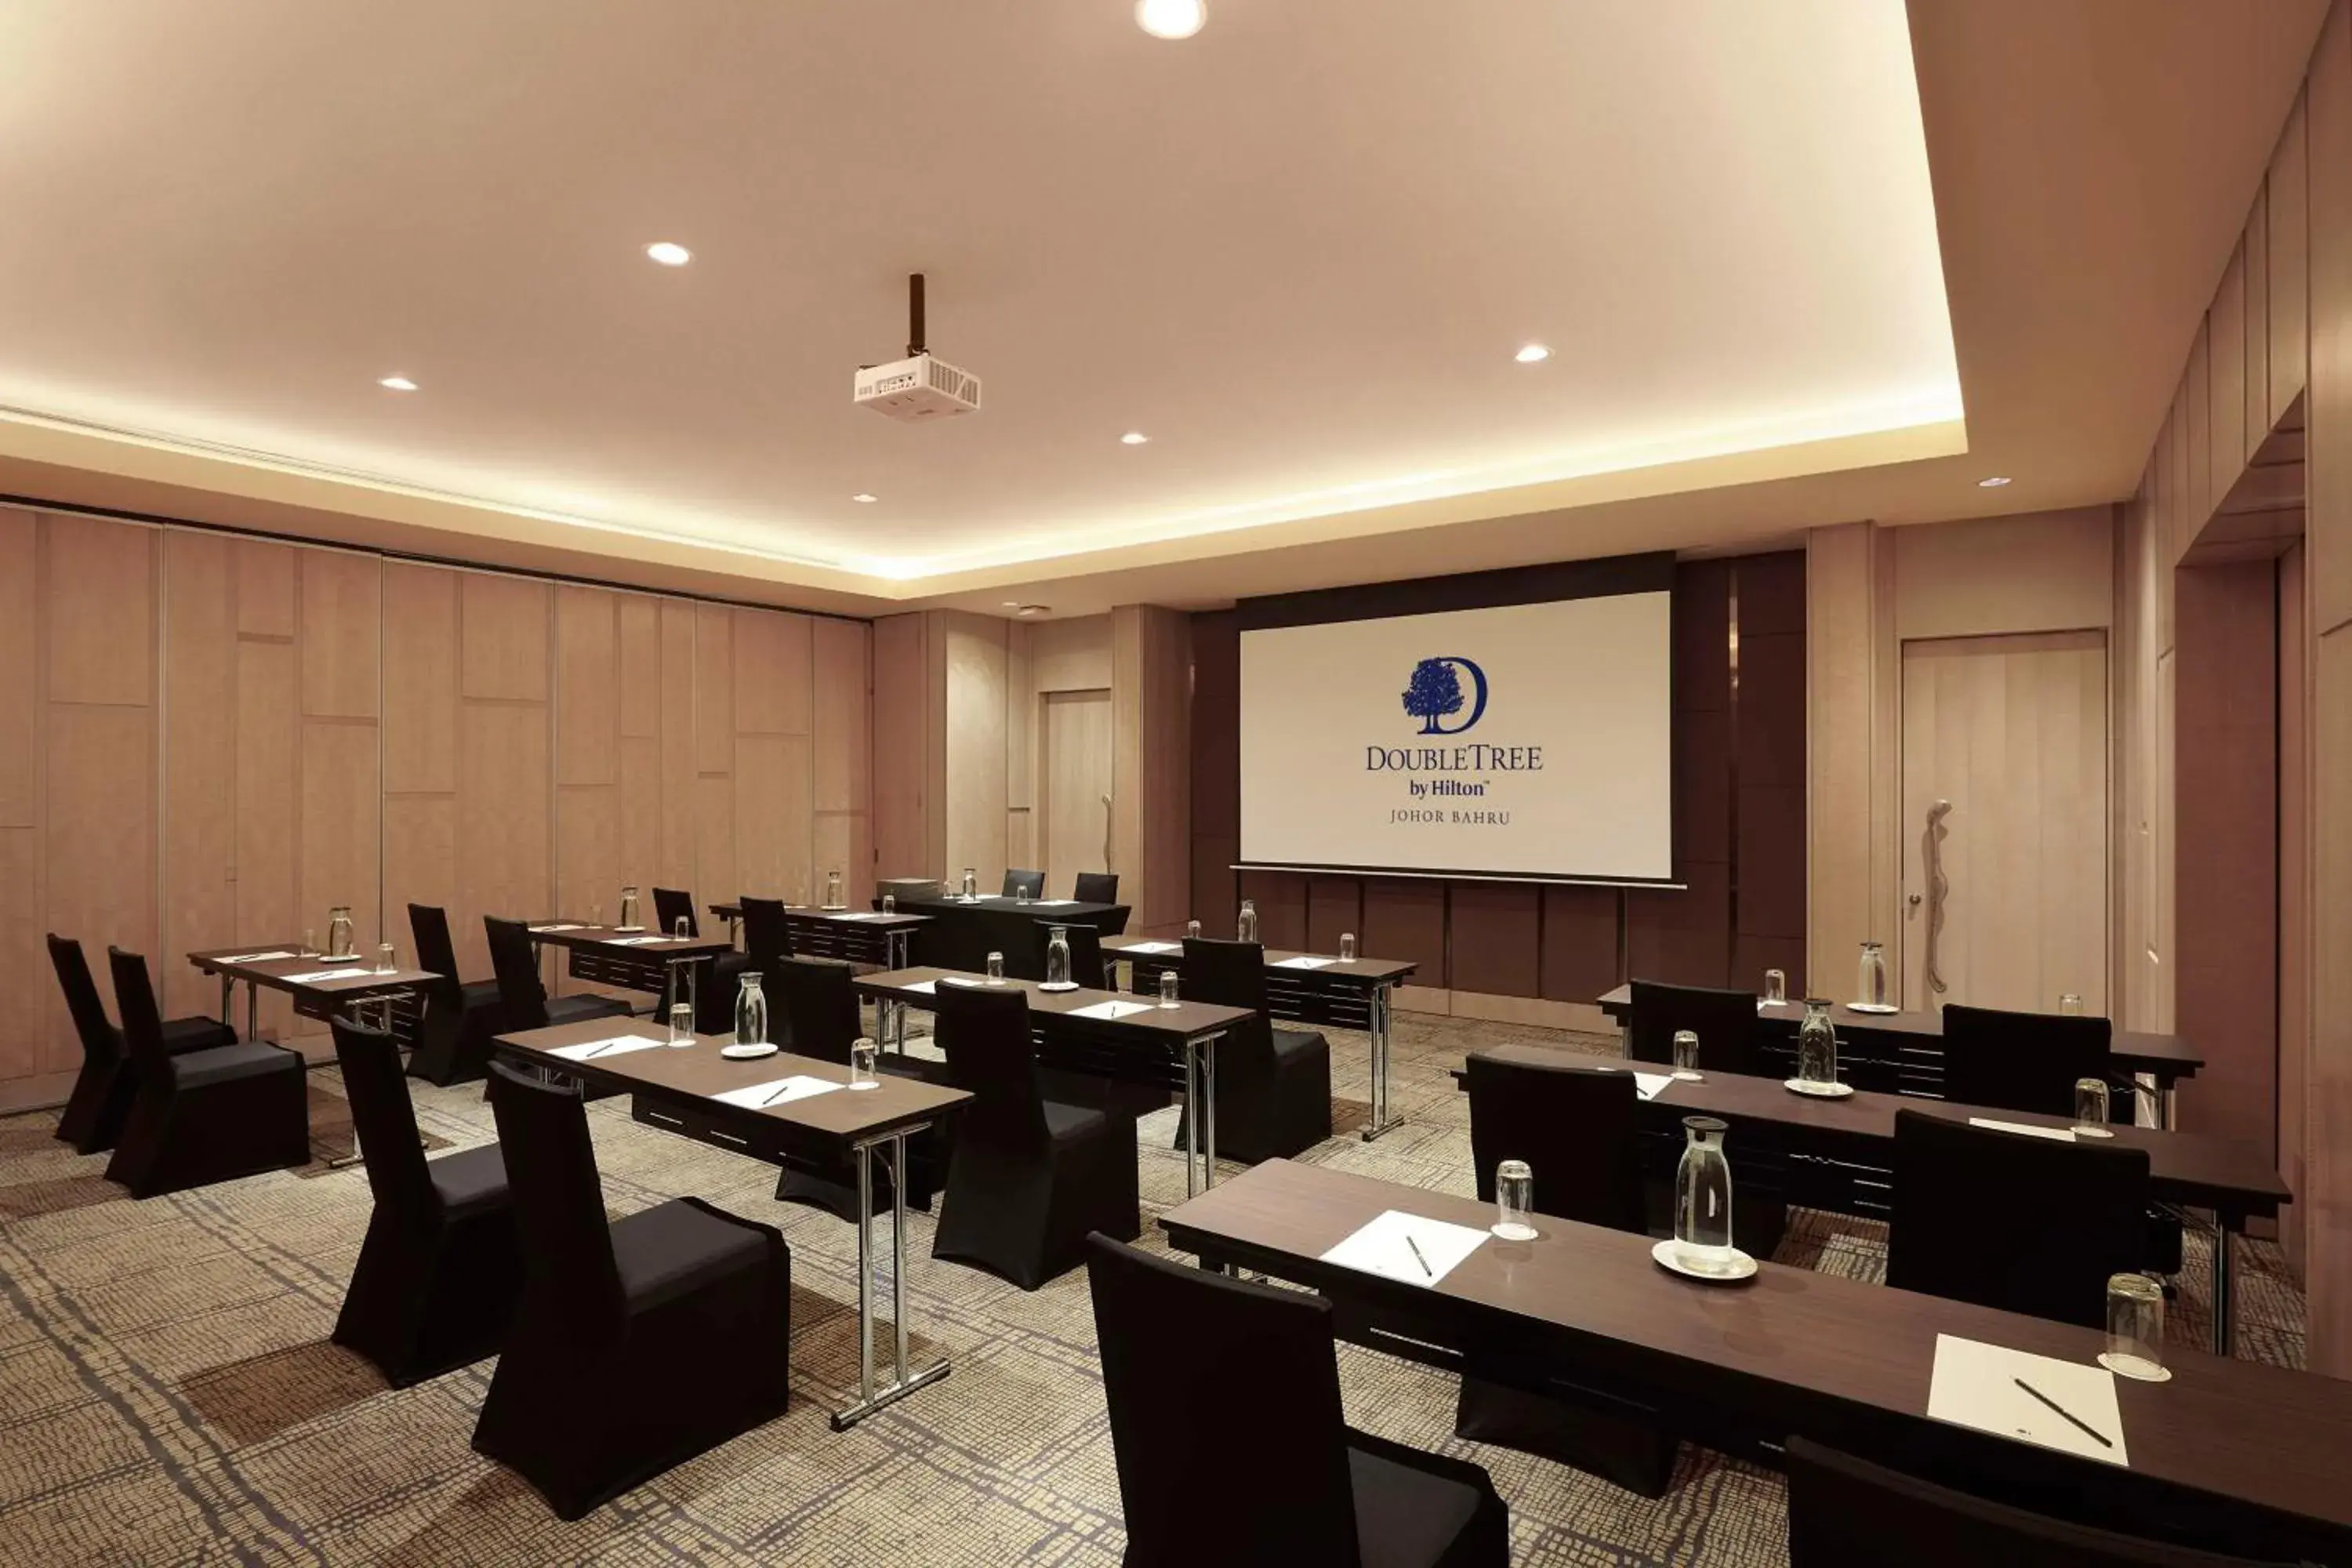 Meeting/conference room in DoubleTree by Hilton Johor Bahru